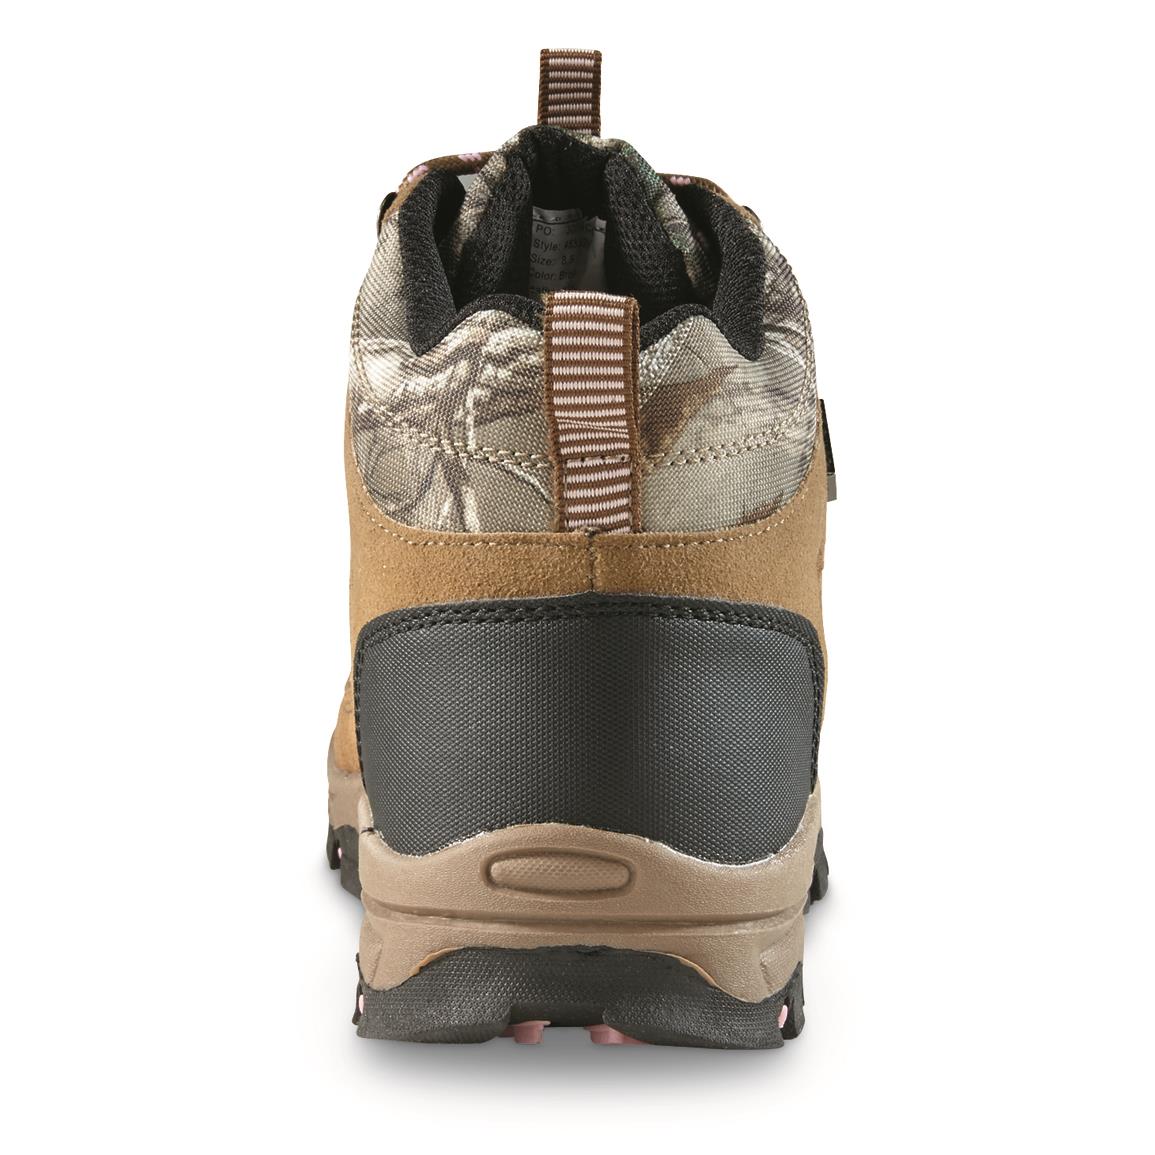 Rugged Hiking Boots | Sportsman's Guide